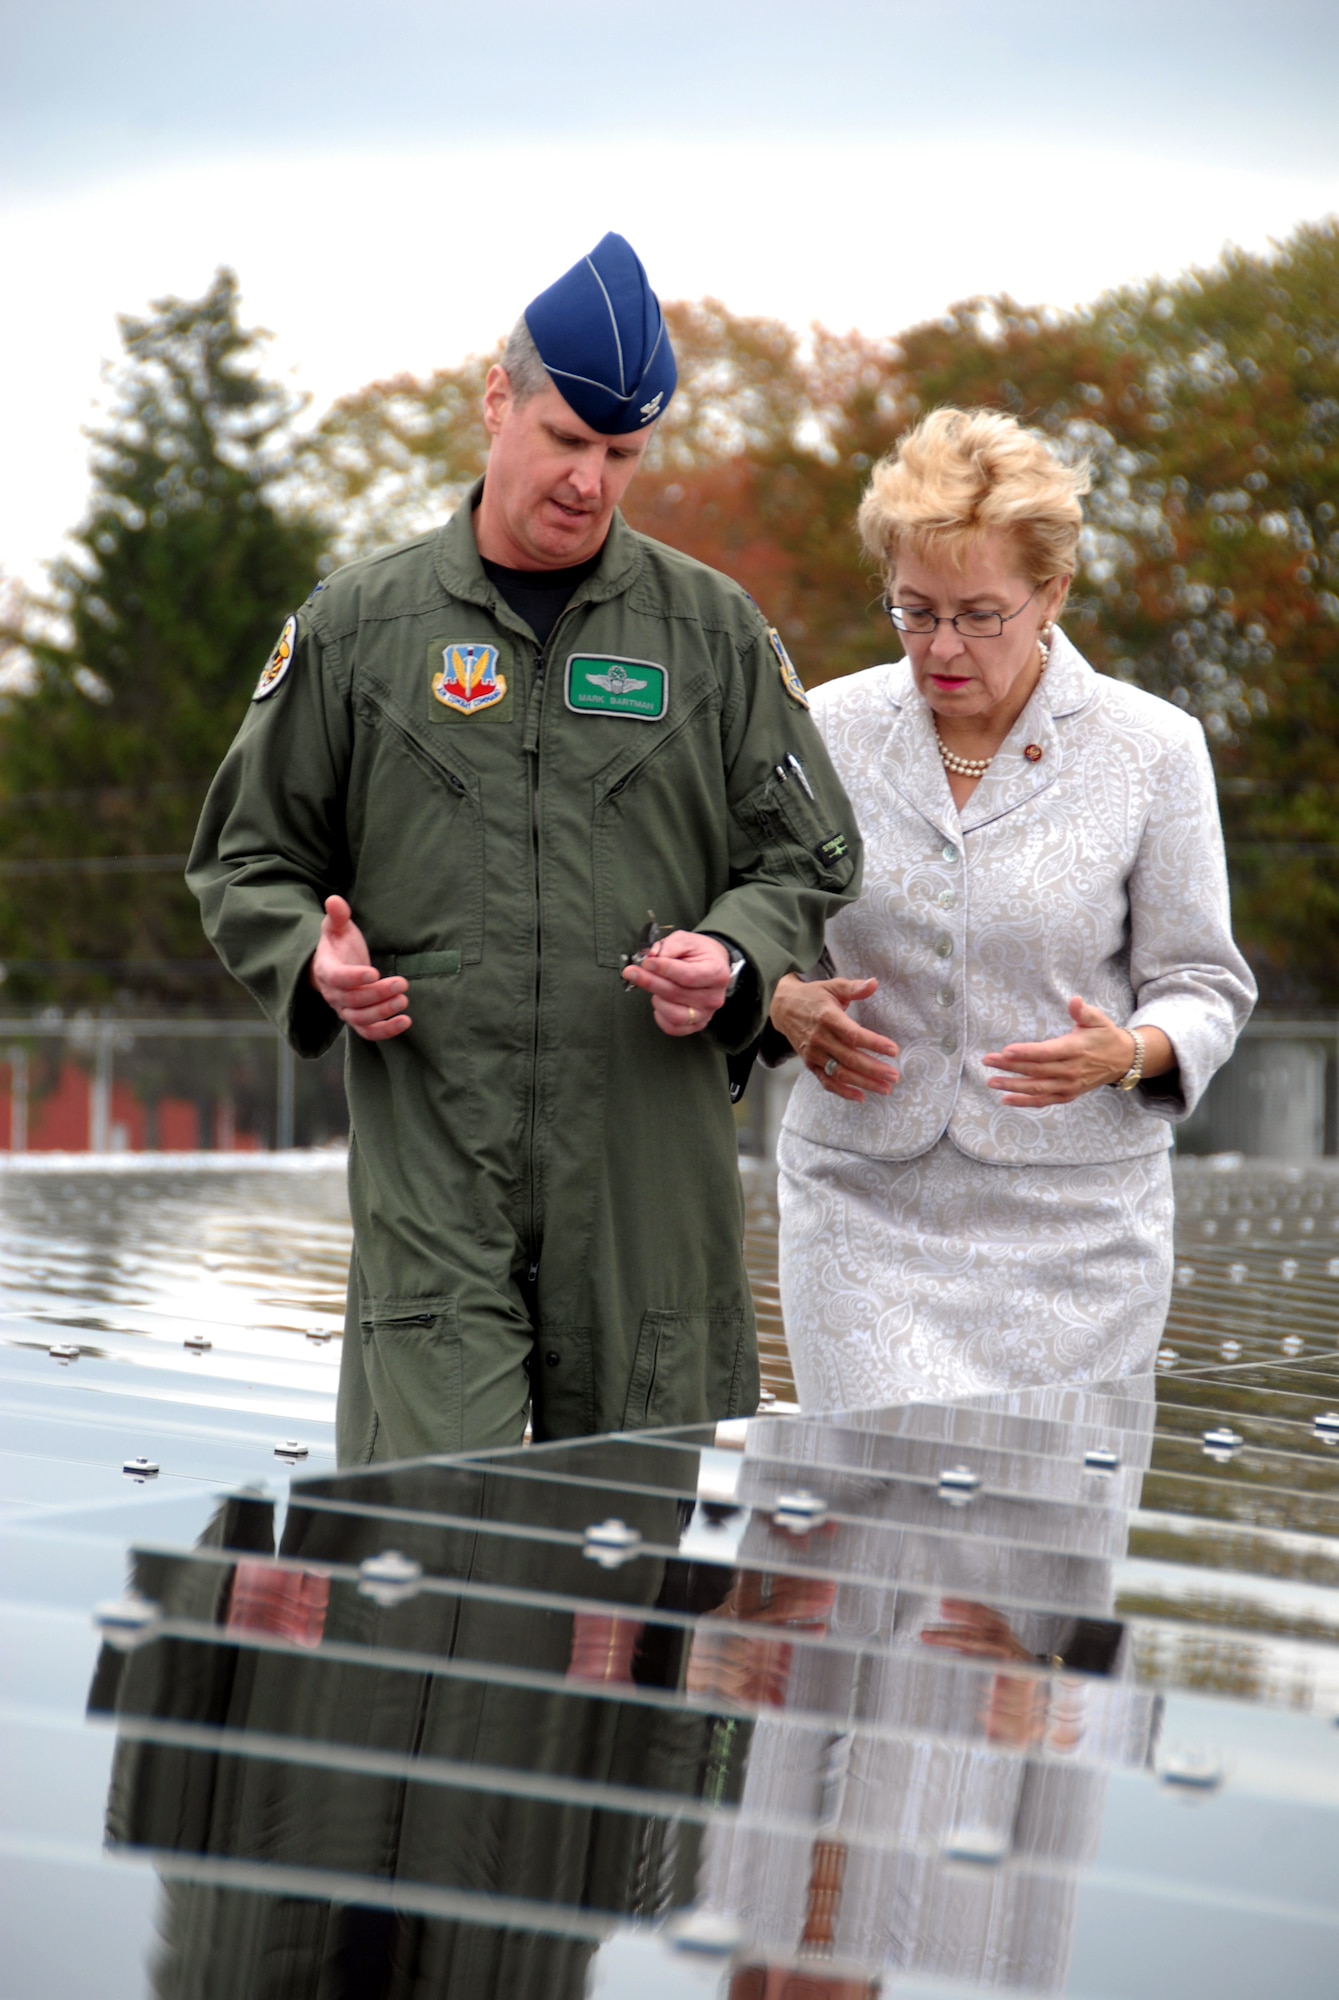 Col. Mark E. Bartman, 180th Fighter Wing Commander, Ohio Air national Guard and Congresswoman Marcy Kaptur walk among the rows of solar panels at the 180th Fighter Wing's Alternative Energy site on September 27, 2008. The solar field is part of the 180th FW's Renewable Energy Project, funded by the Department of Defense Research and Development Program in an effort to reduce the 180th's use of limited fossil fuel and dependence on foreign energy sources. Once completed, the solar field is expected to produce 800-900 Kilowatts of electricity, which will allow the 180th to save approximately 37.5% on the annual electricity budget. The solar field will also reduce the amount of coal burned to produce energy by almost 250 tons annually, while at the same time reducing harmful emissions and greenhouse gasses. USAF Photo by Senior Airman Jodi Joice (Released).
